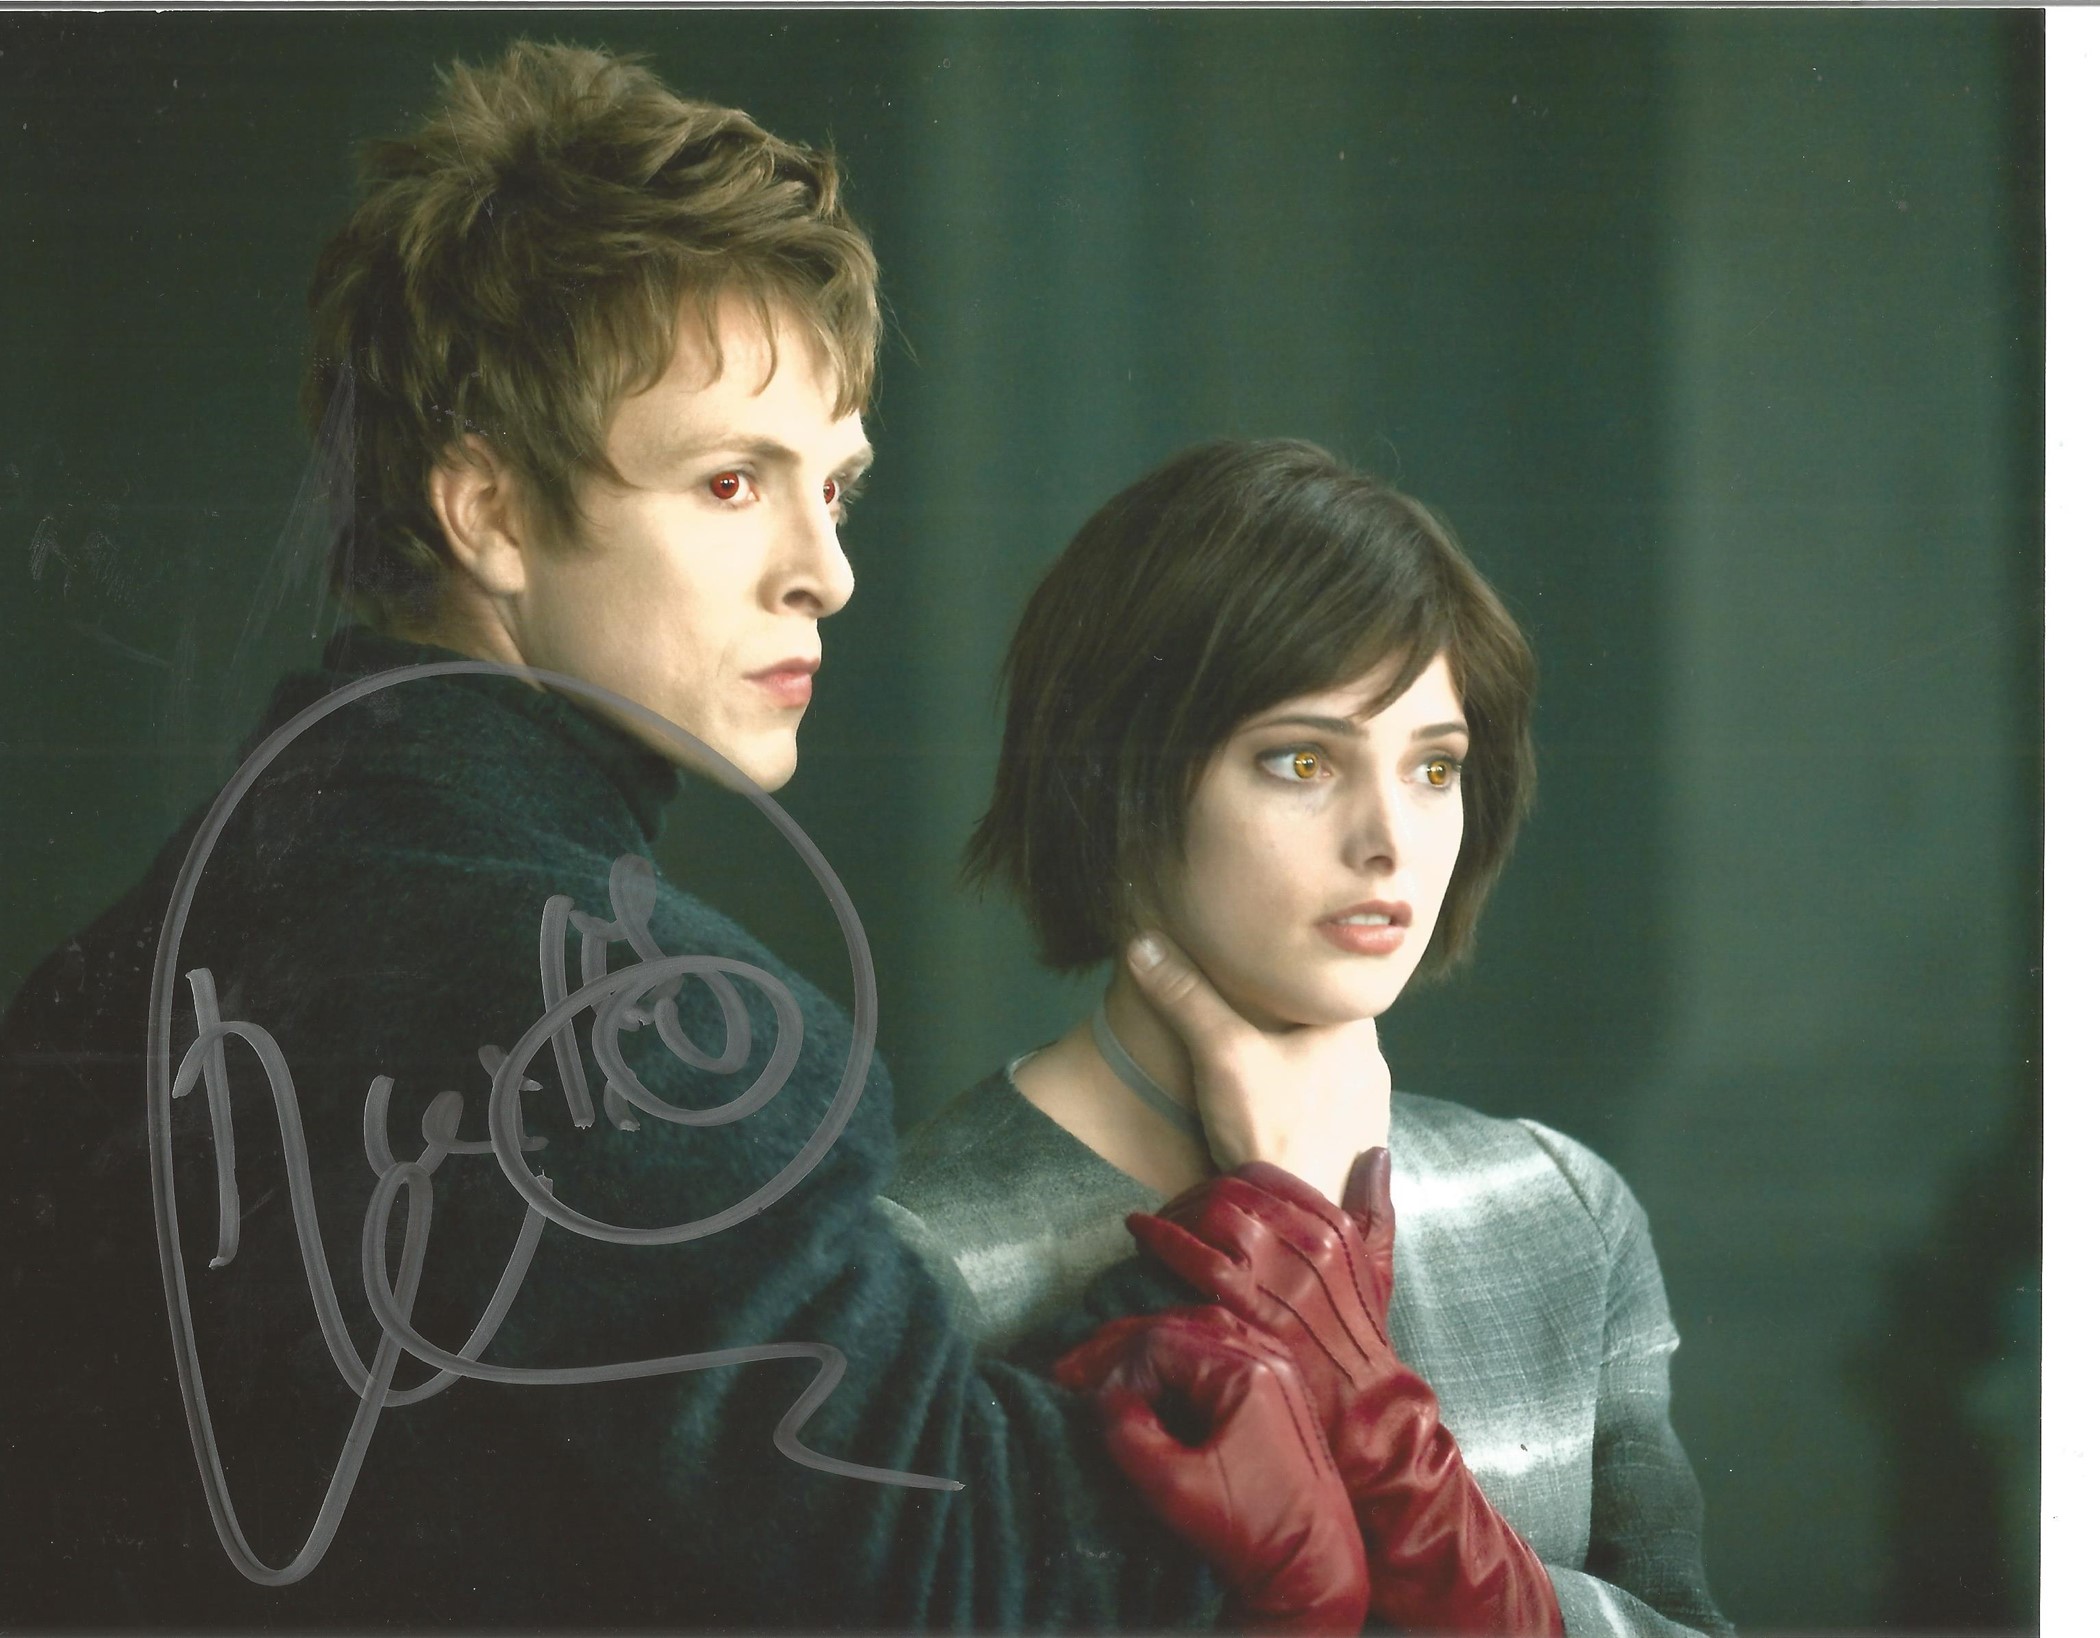 Charlie Bewley actor signed 10 x 8 inch Colour Photo. Charles Martin Bewley is an English actor